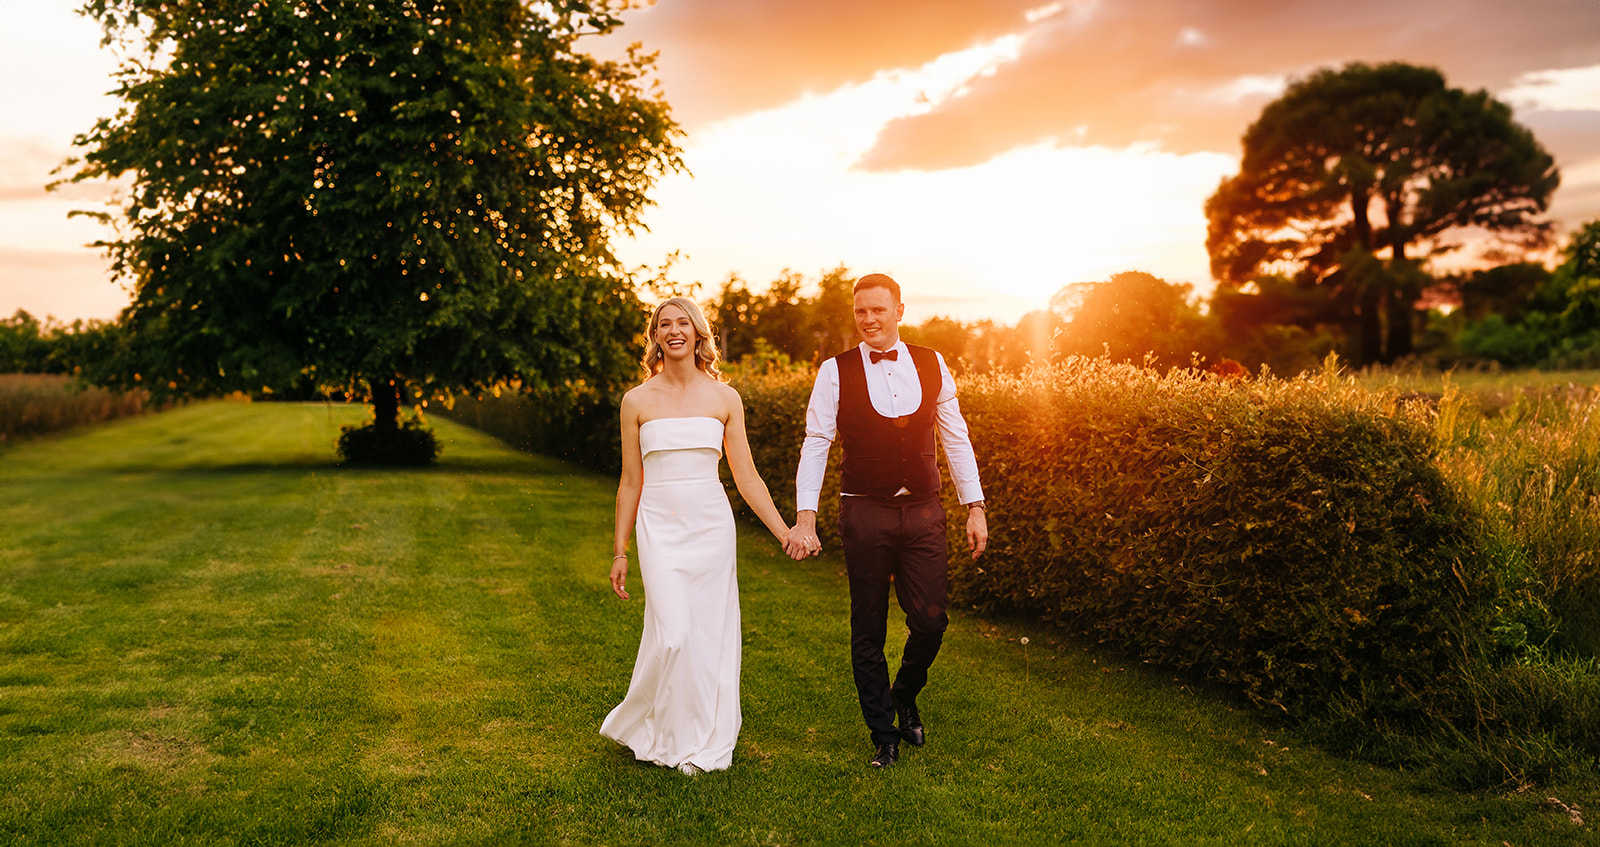 Bride and groom walk hand in hand in castle durrow grounds with sunset behind them